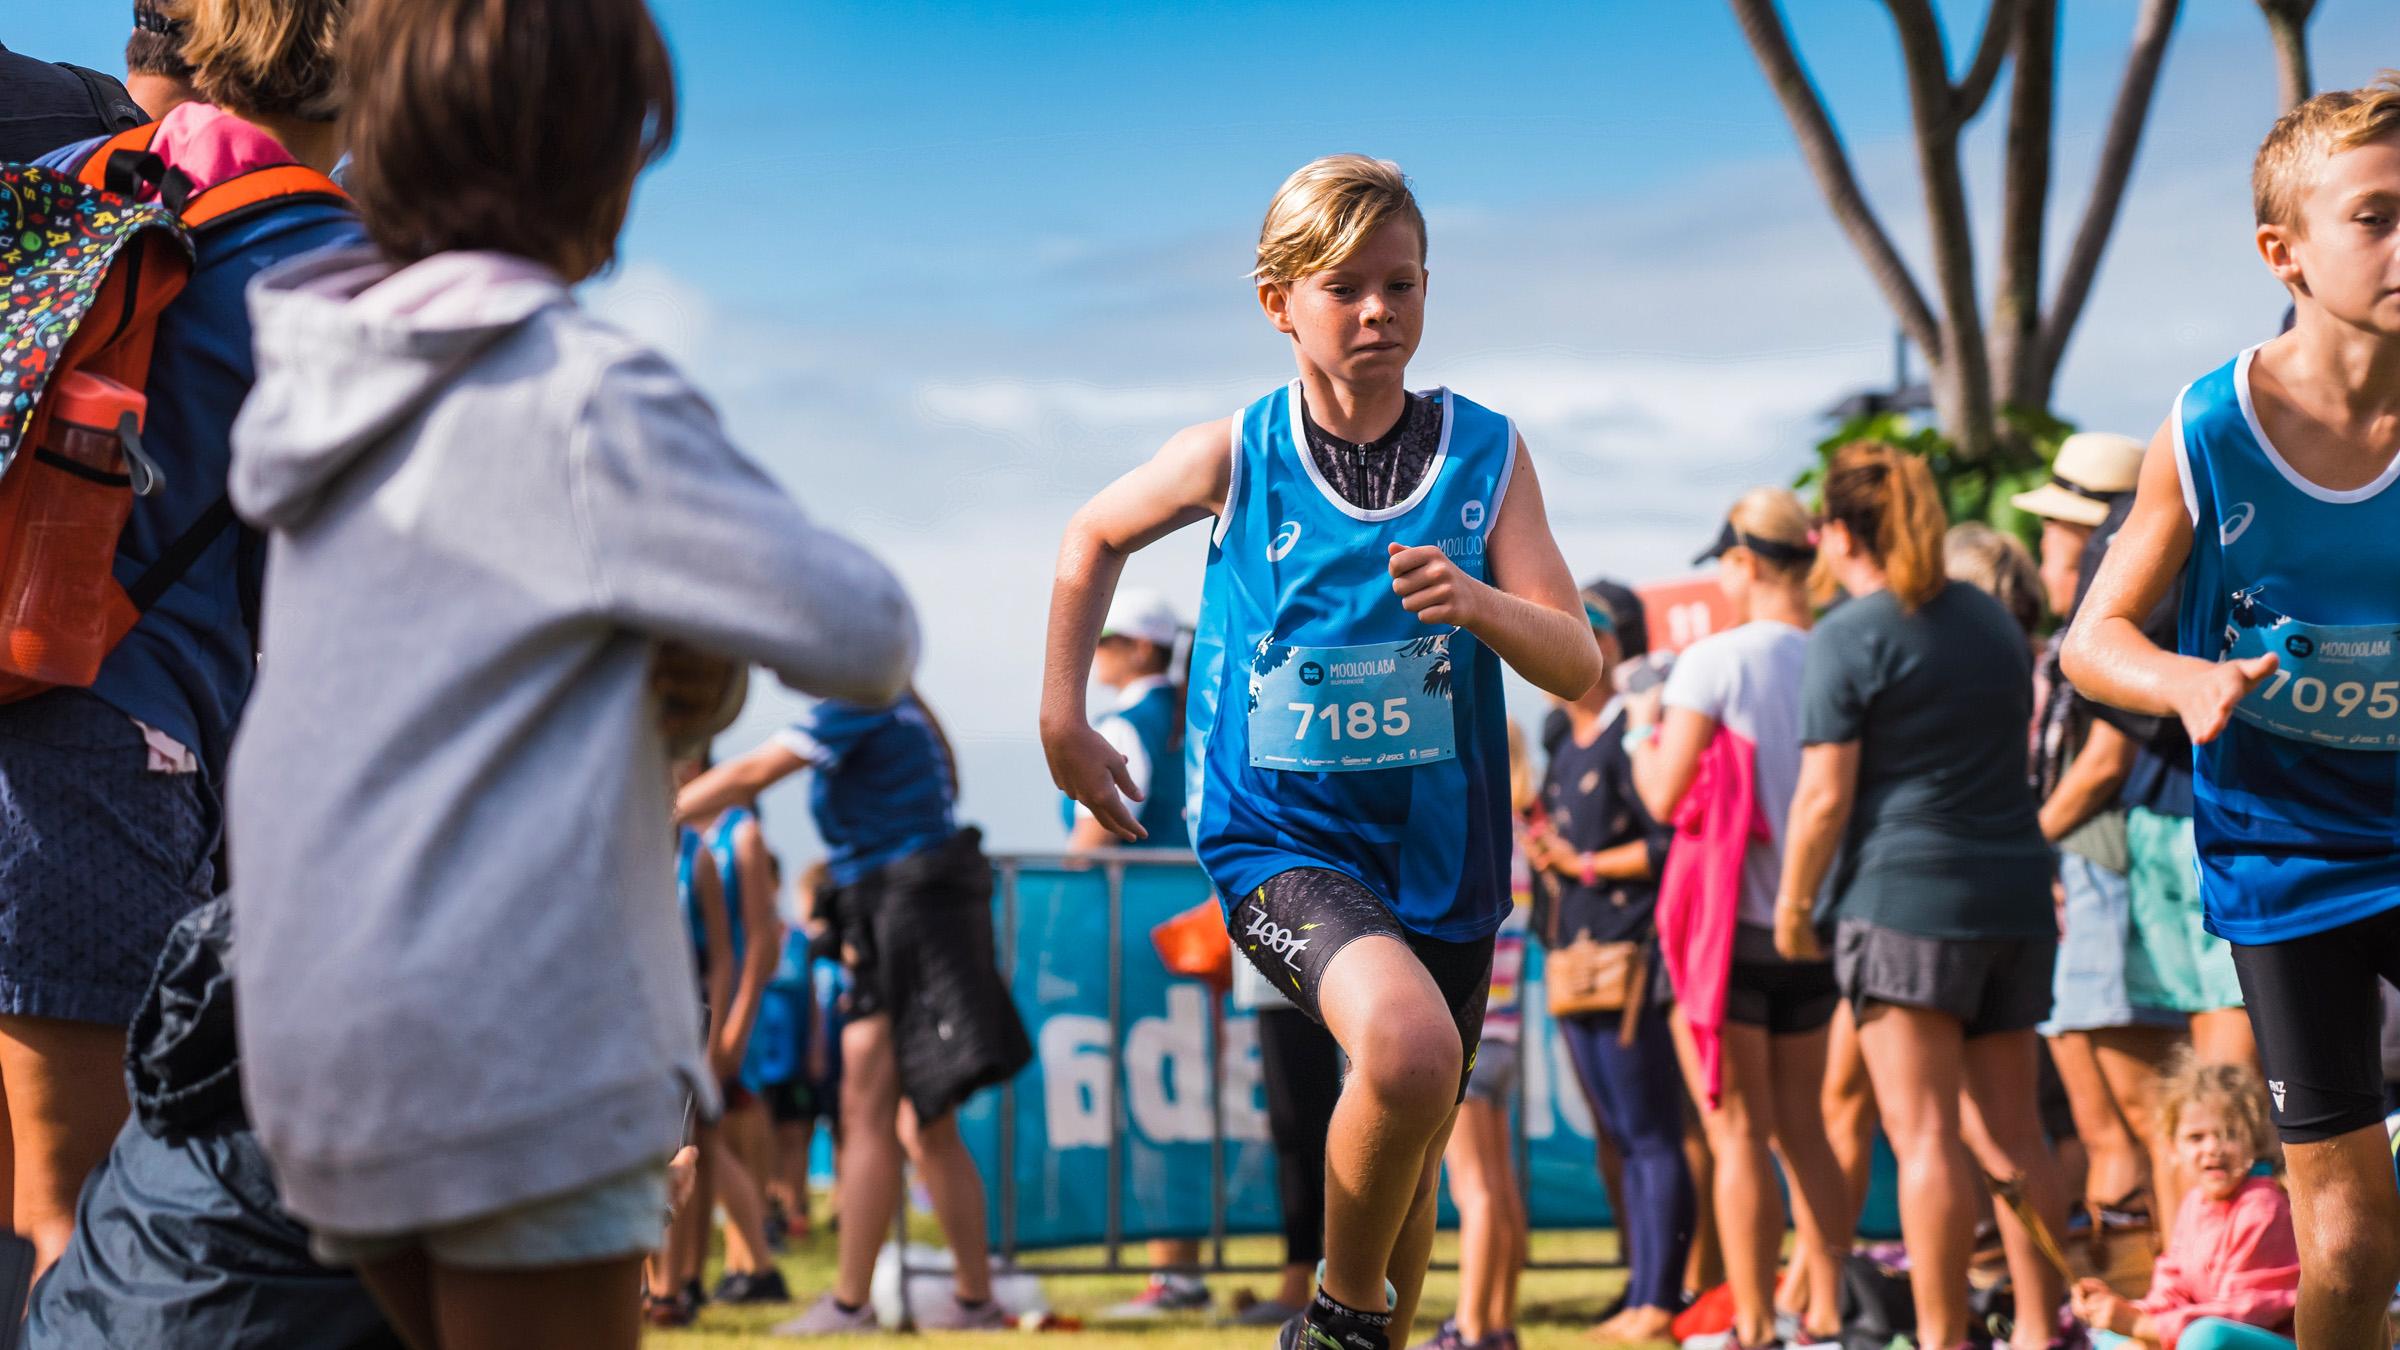 Young athlete running in the Mooloolaba Triathlon